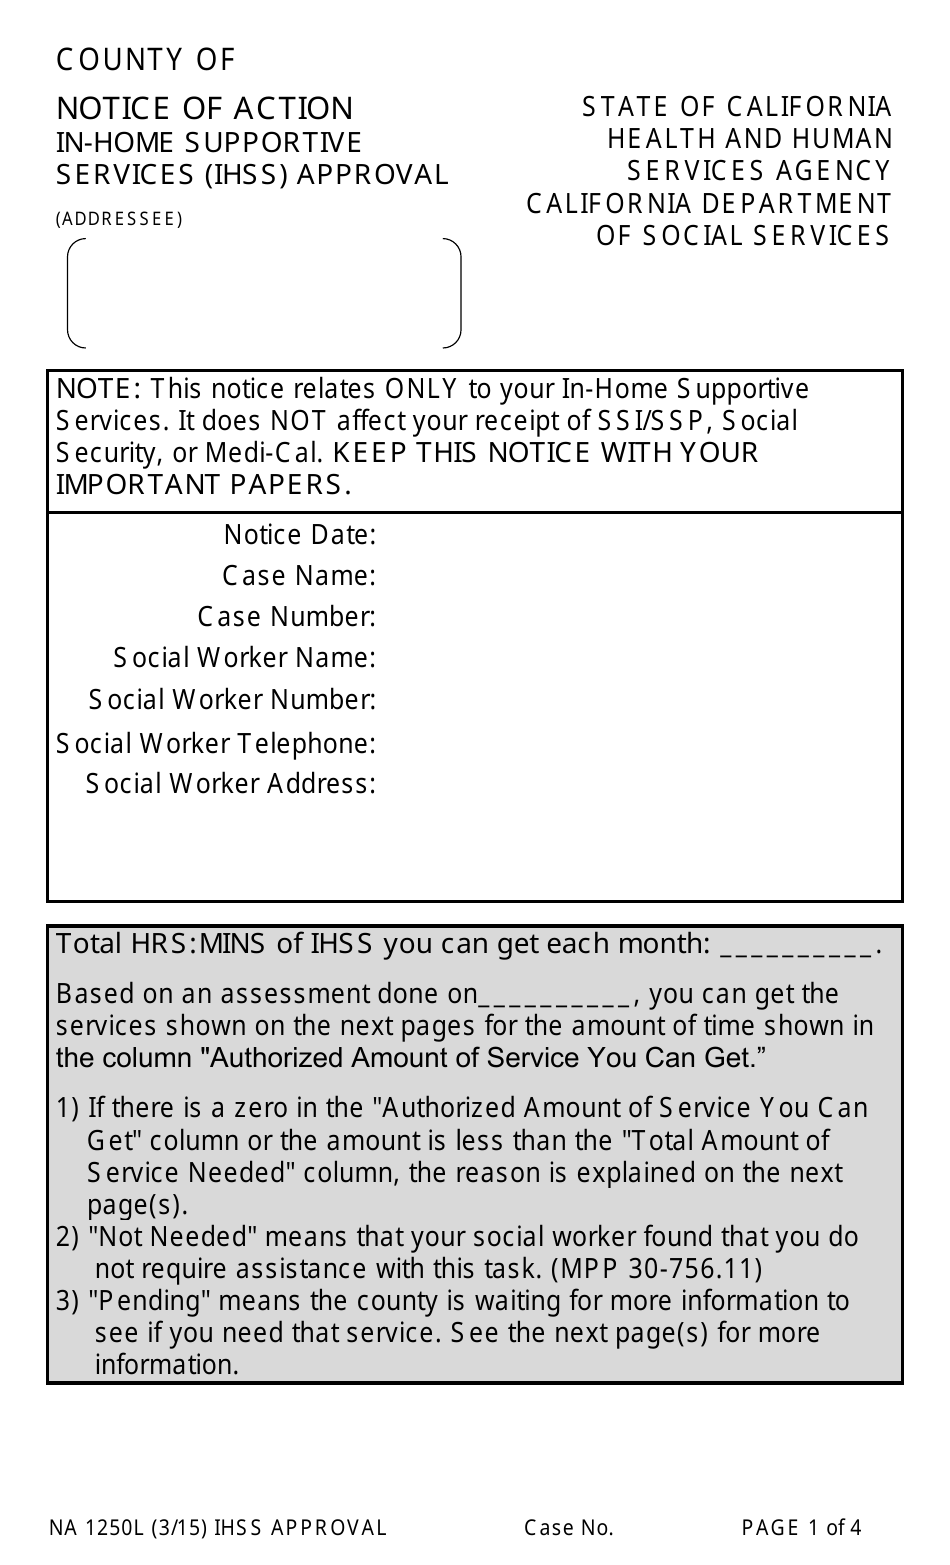 Form NA1250L Notice of Action in-Home Supportive Services (Ihss) Approval - California, Page 1